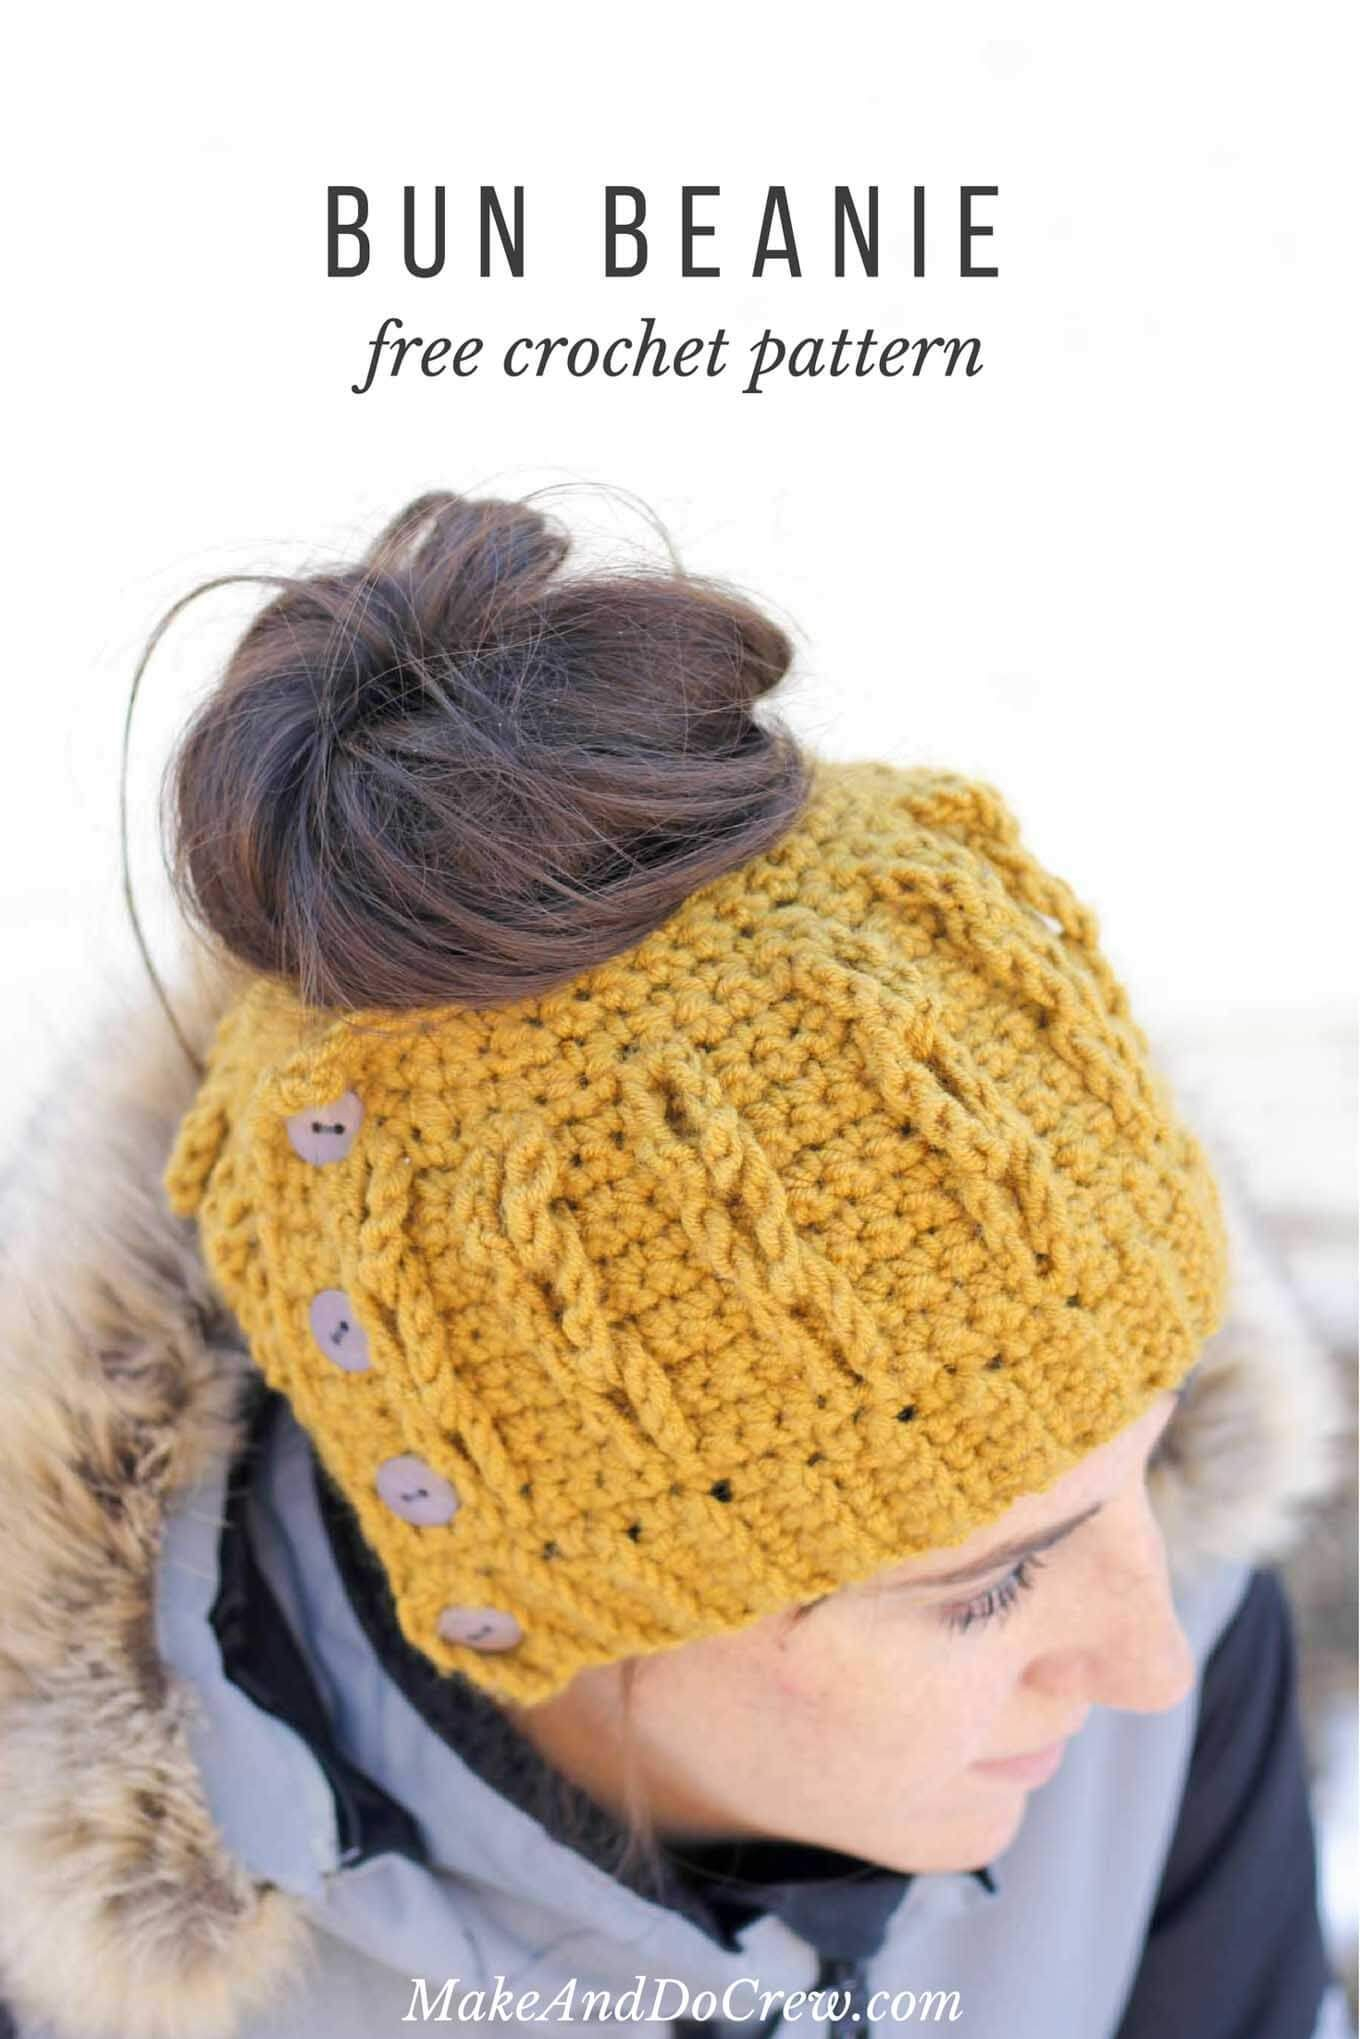 Single Crochet Beanie Pattern Free Crochet Bun Beanie With Faux Cables Free Pattern And Video